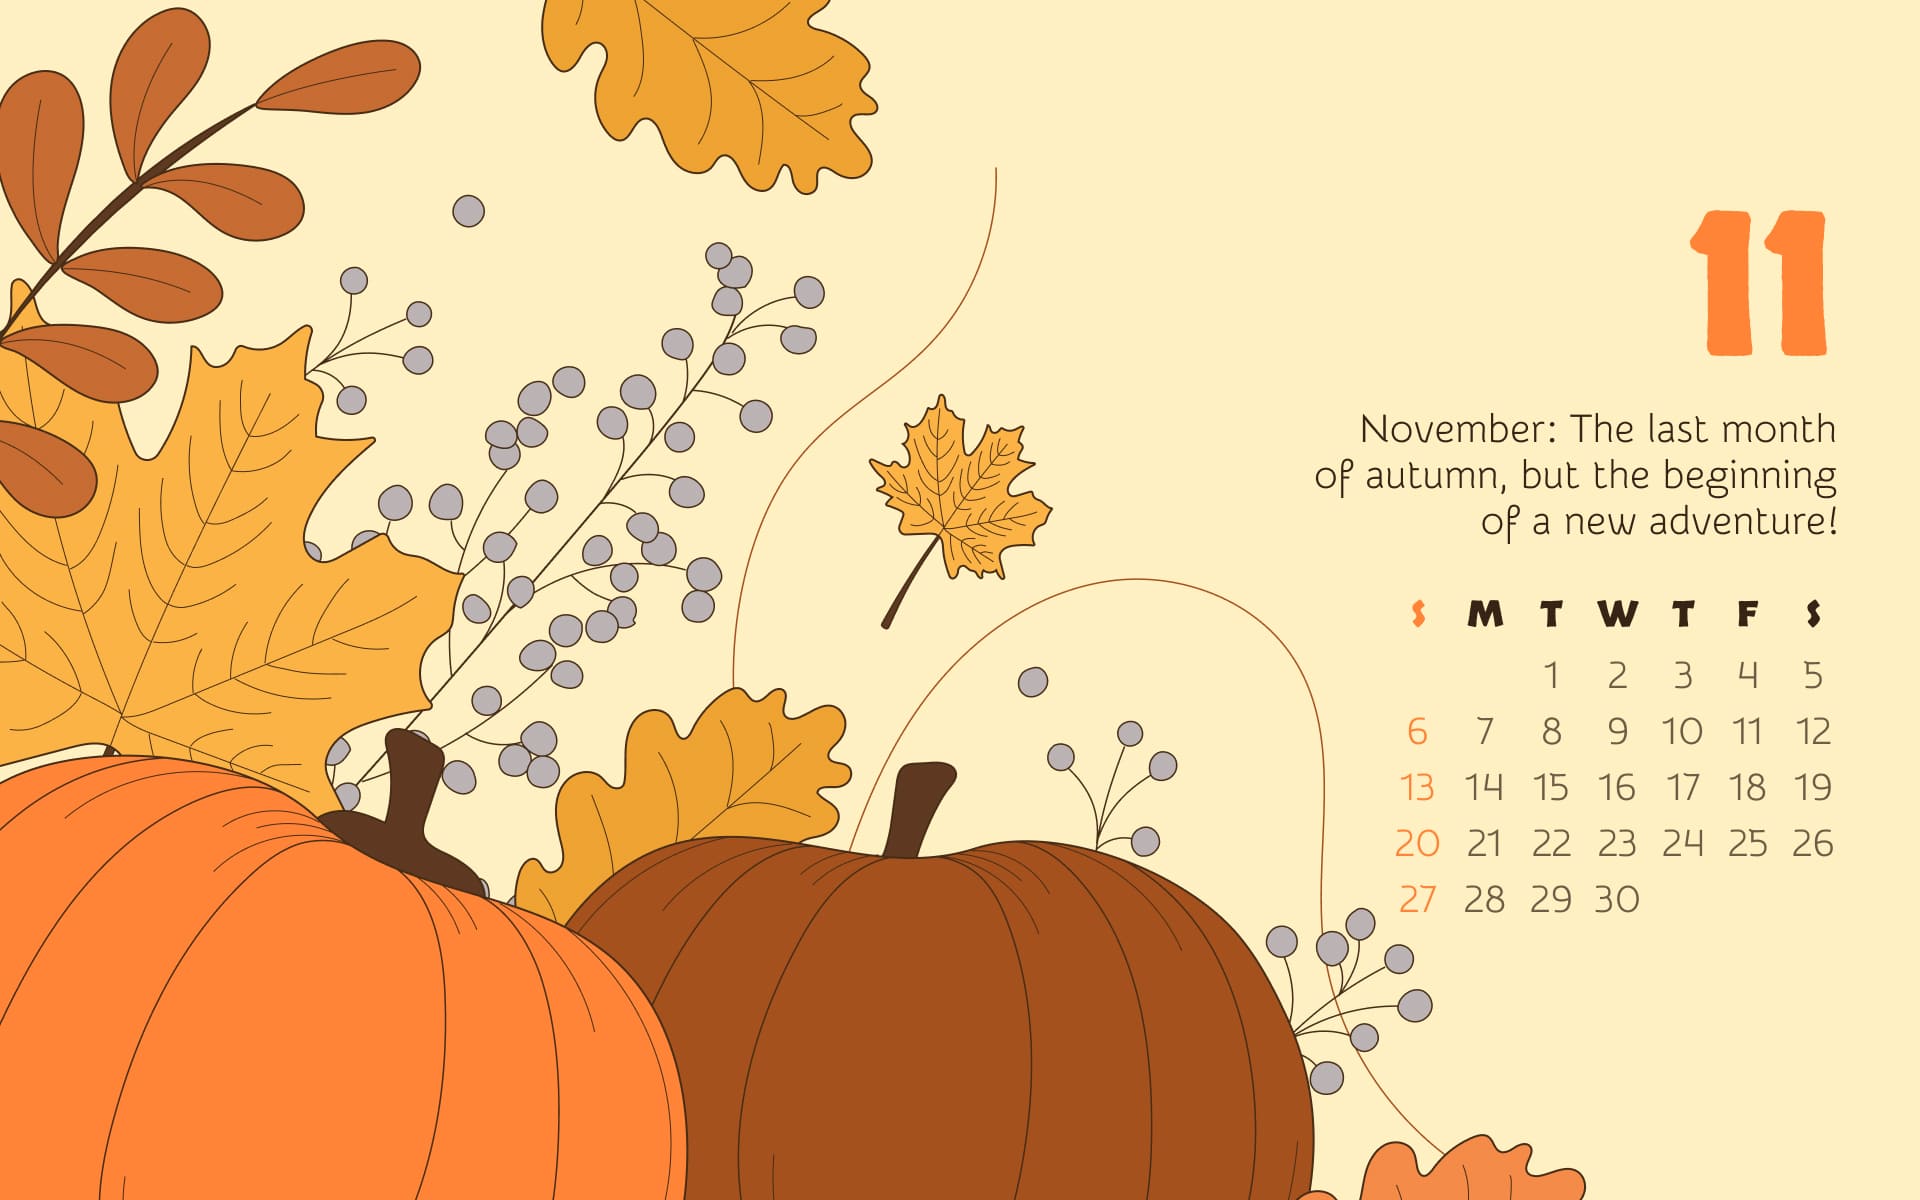 Calendar November in the picture size 1920x1200.